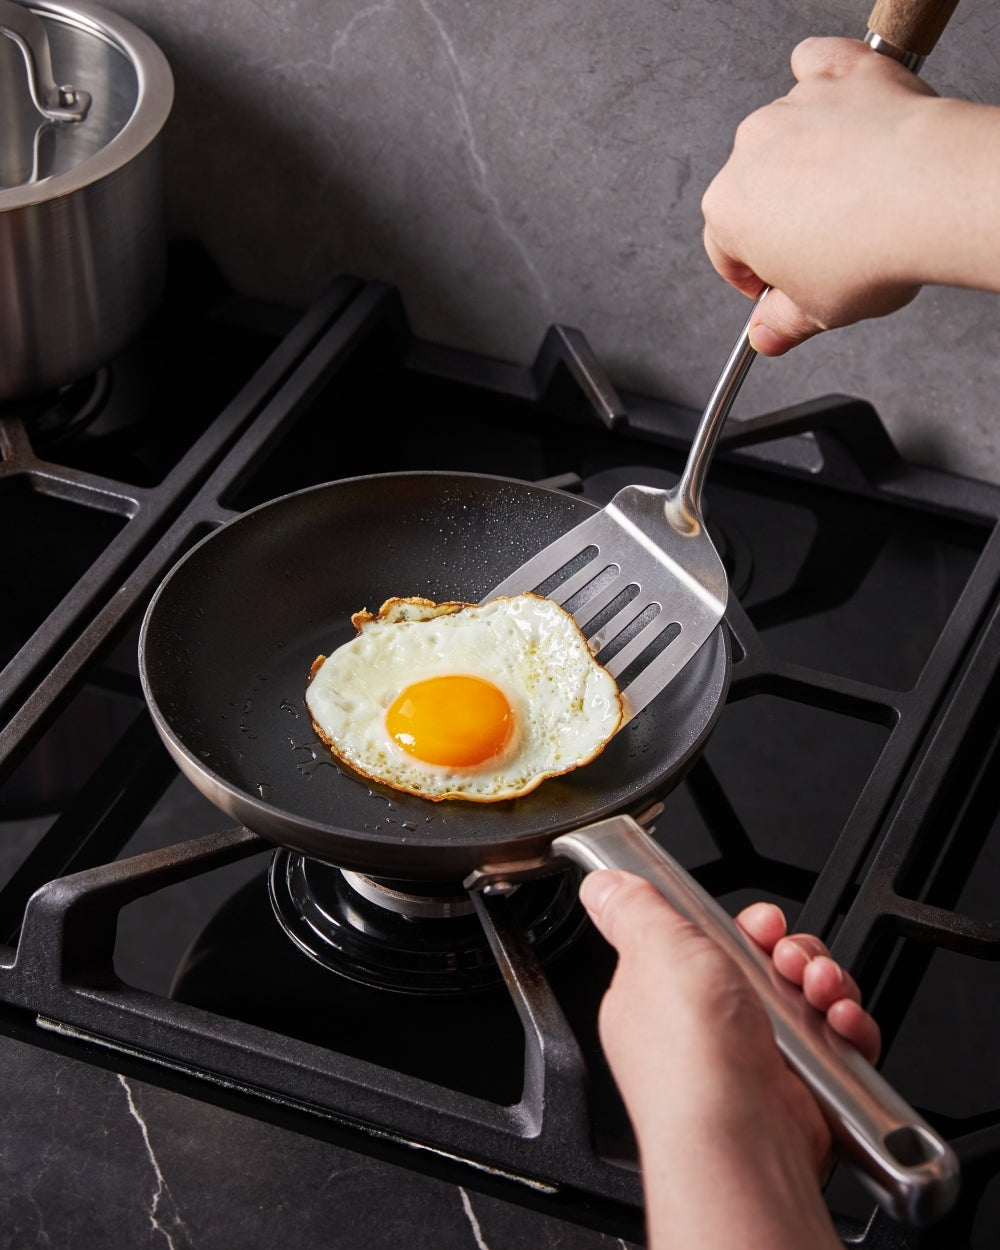 Ceramic Fry Pan Trio, Non-Toxic Coating for Frying, Non-Stick Coating